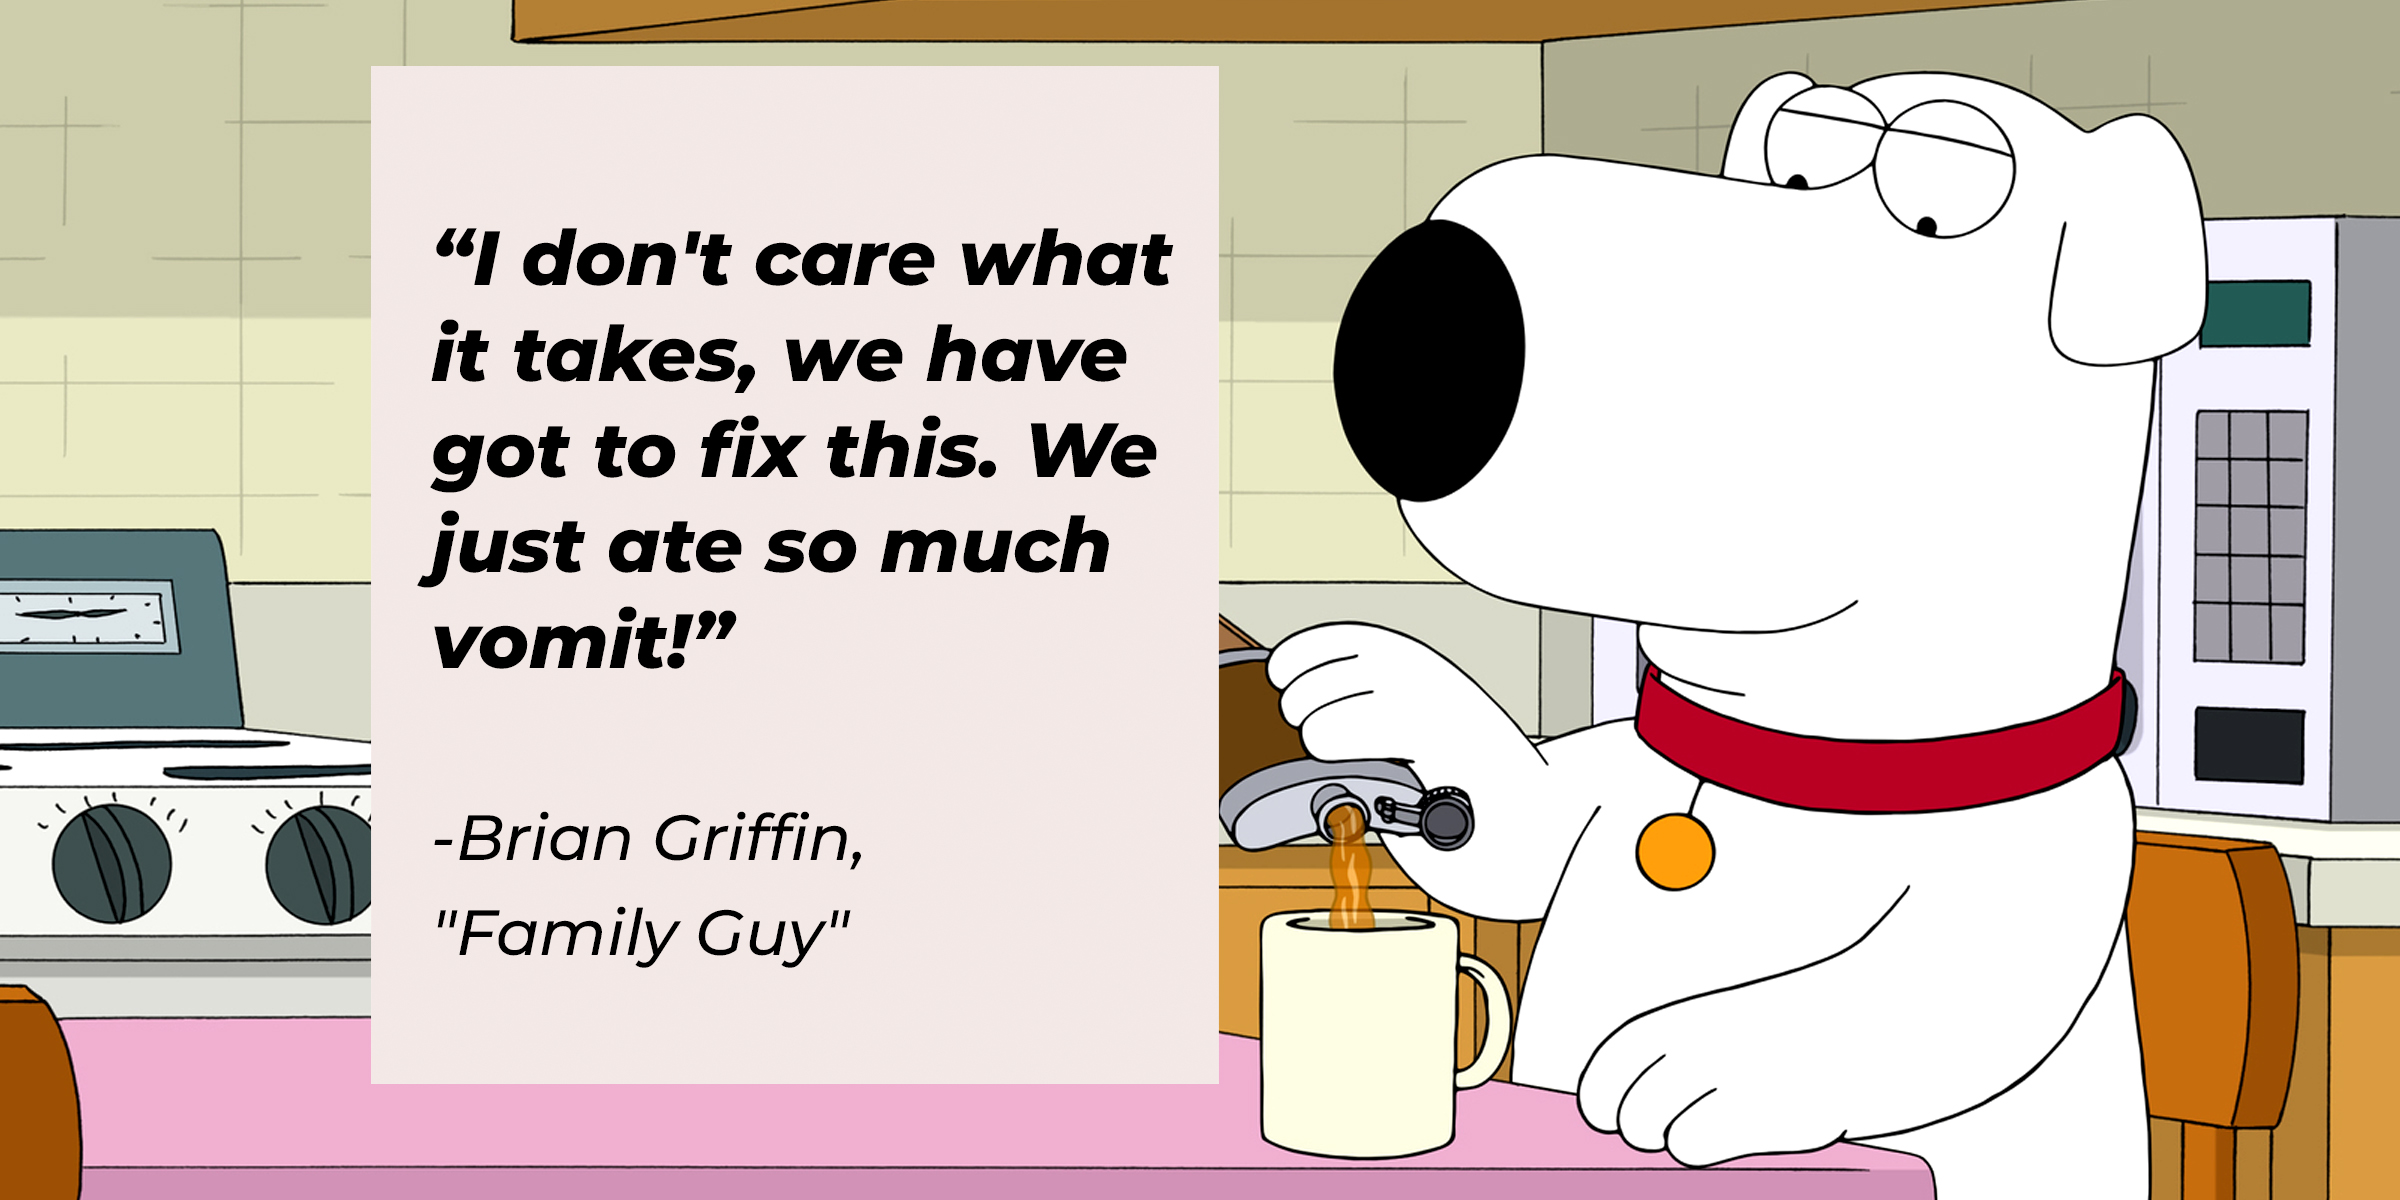 Peter Griffin with Brian Griffin's quote: “I don't care what it takes, we have got to fix this. We just ate so much vomit!" | Source: Facebook.com/FamilyGuy